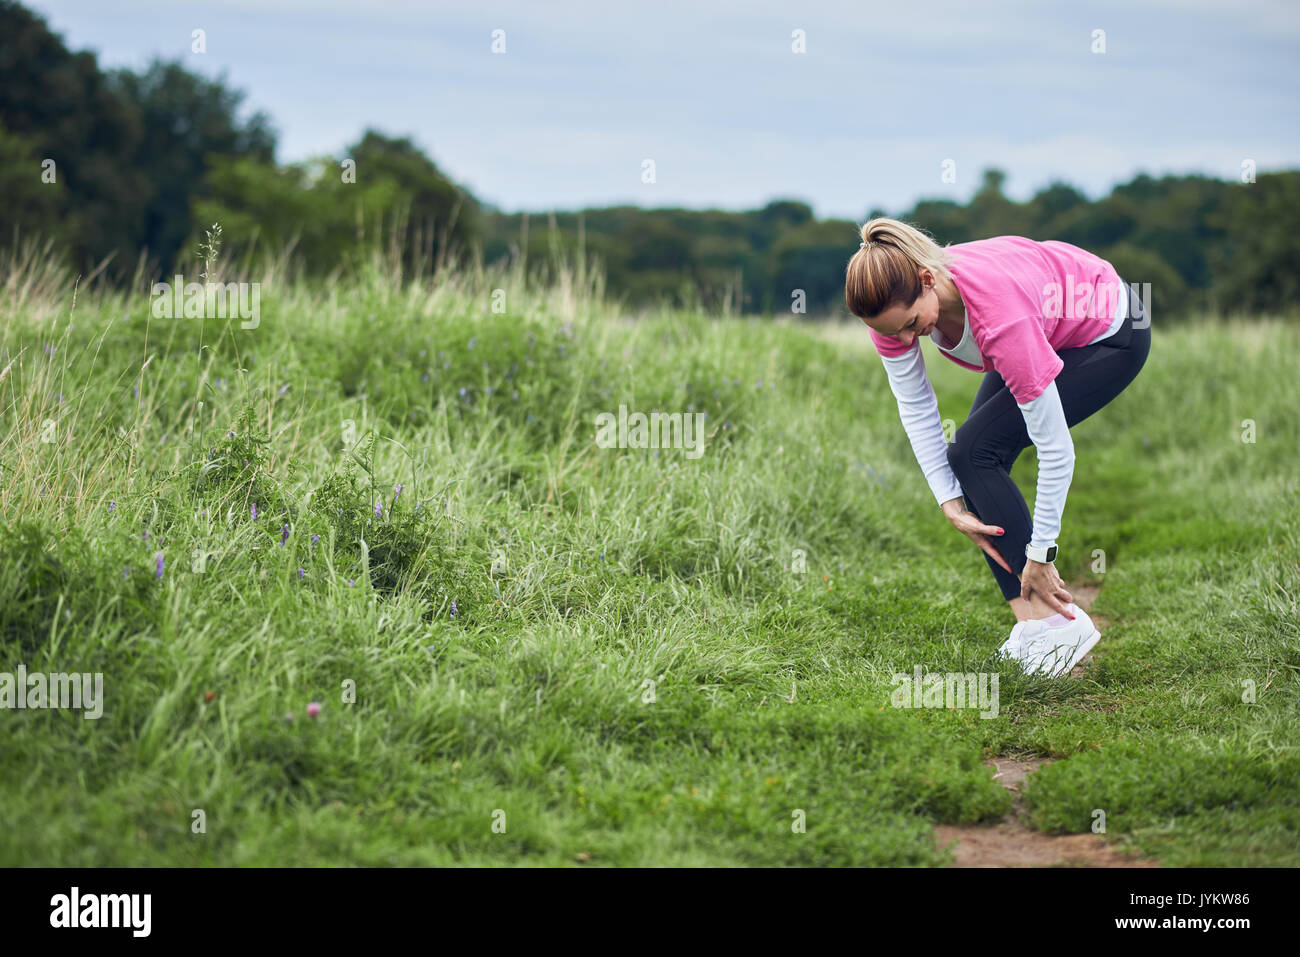 An exercising woman in fit wear while running outdoors, stop to clutch an injured ankle. Stock Photo